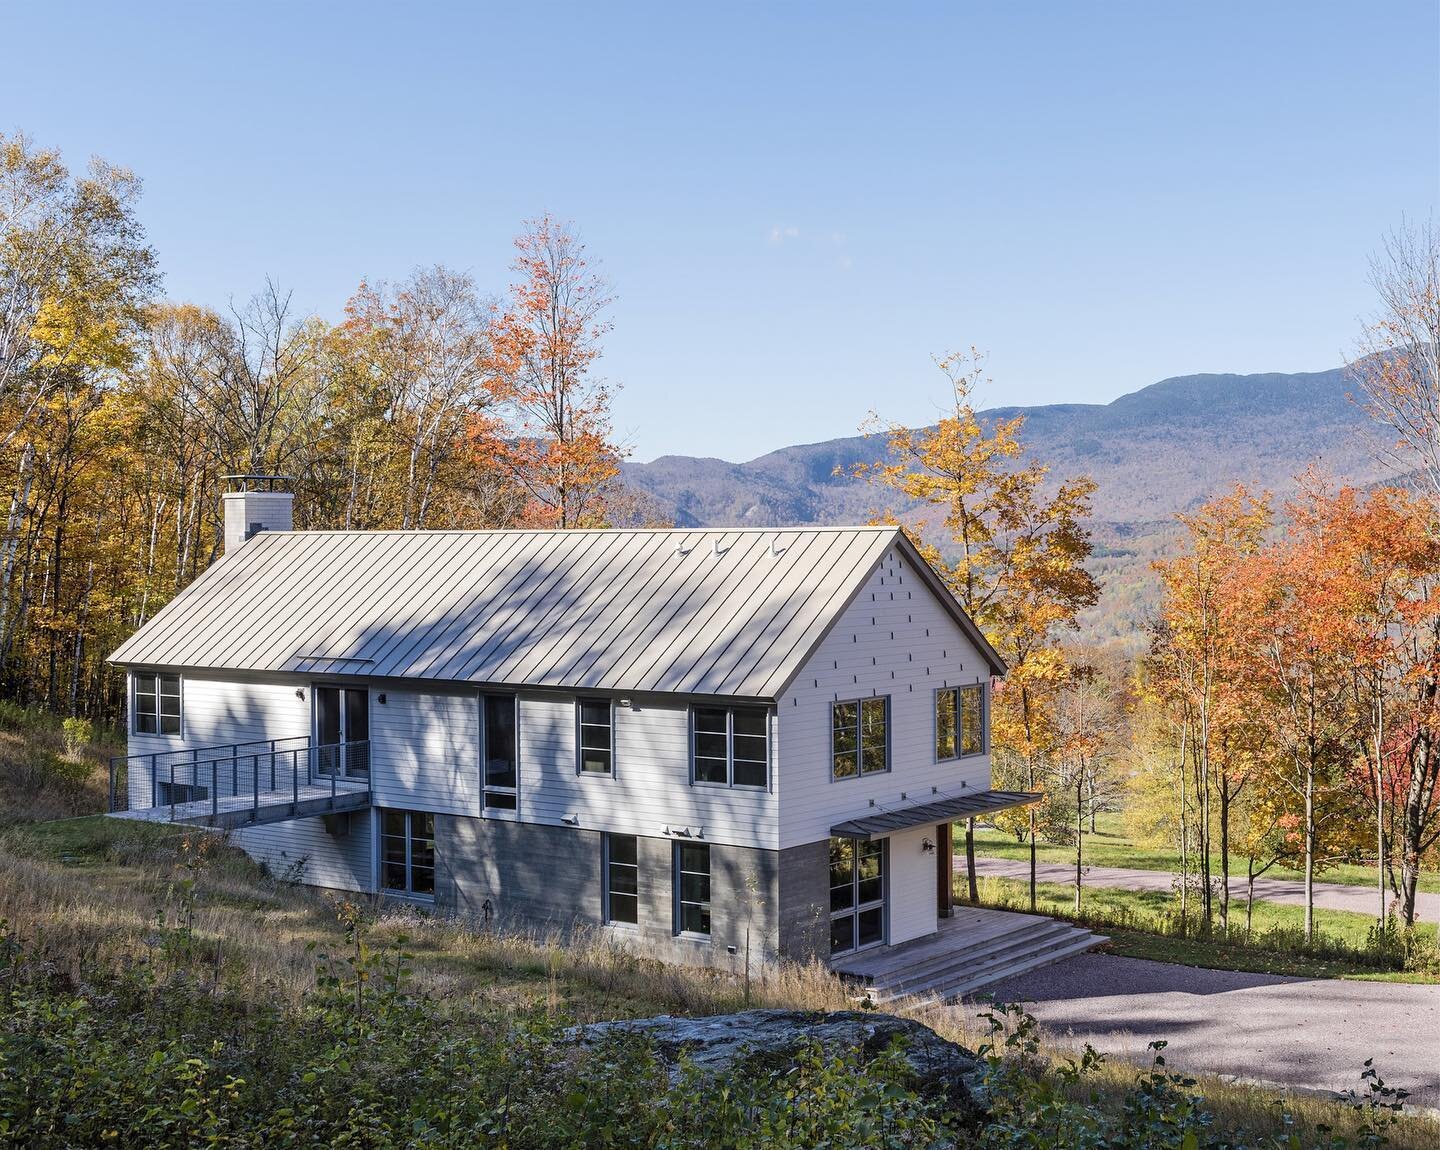 Going through the archives this #Archtober. This private residence in Vermont ties into its surrounding landscapes with tall windows that are strategically placed around interior spaces to provide optimal views out towards the mountain ranges and all